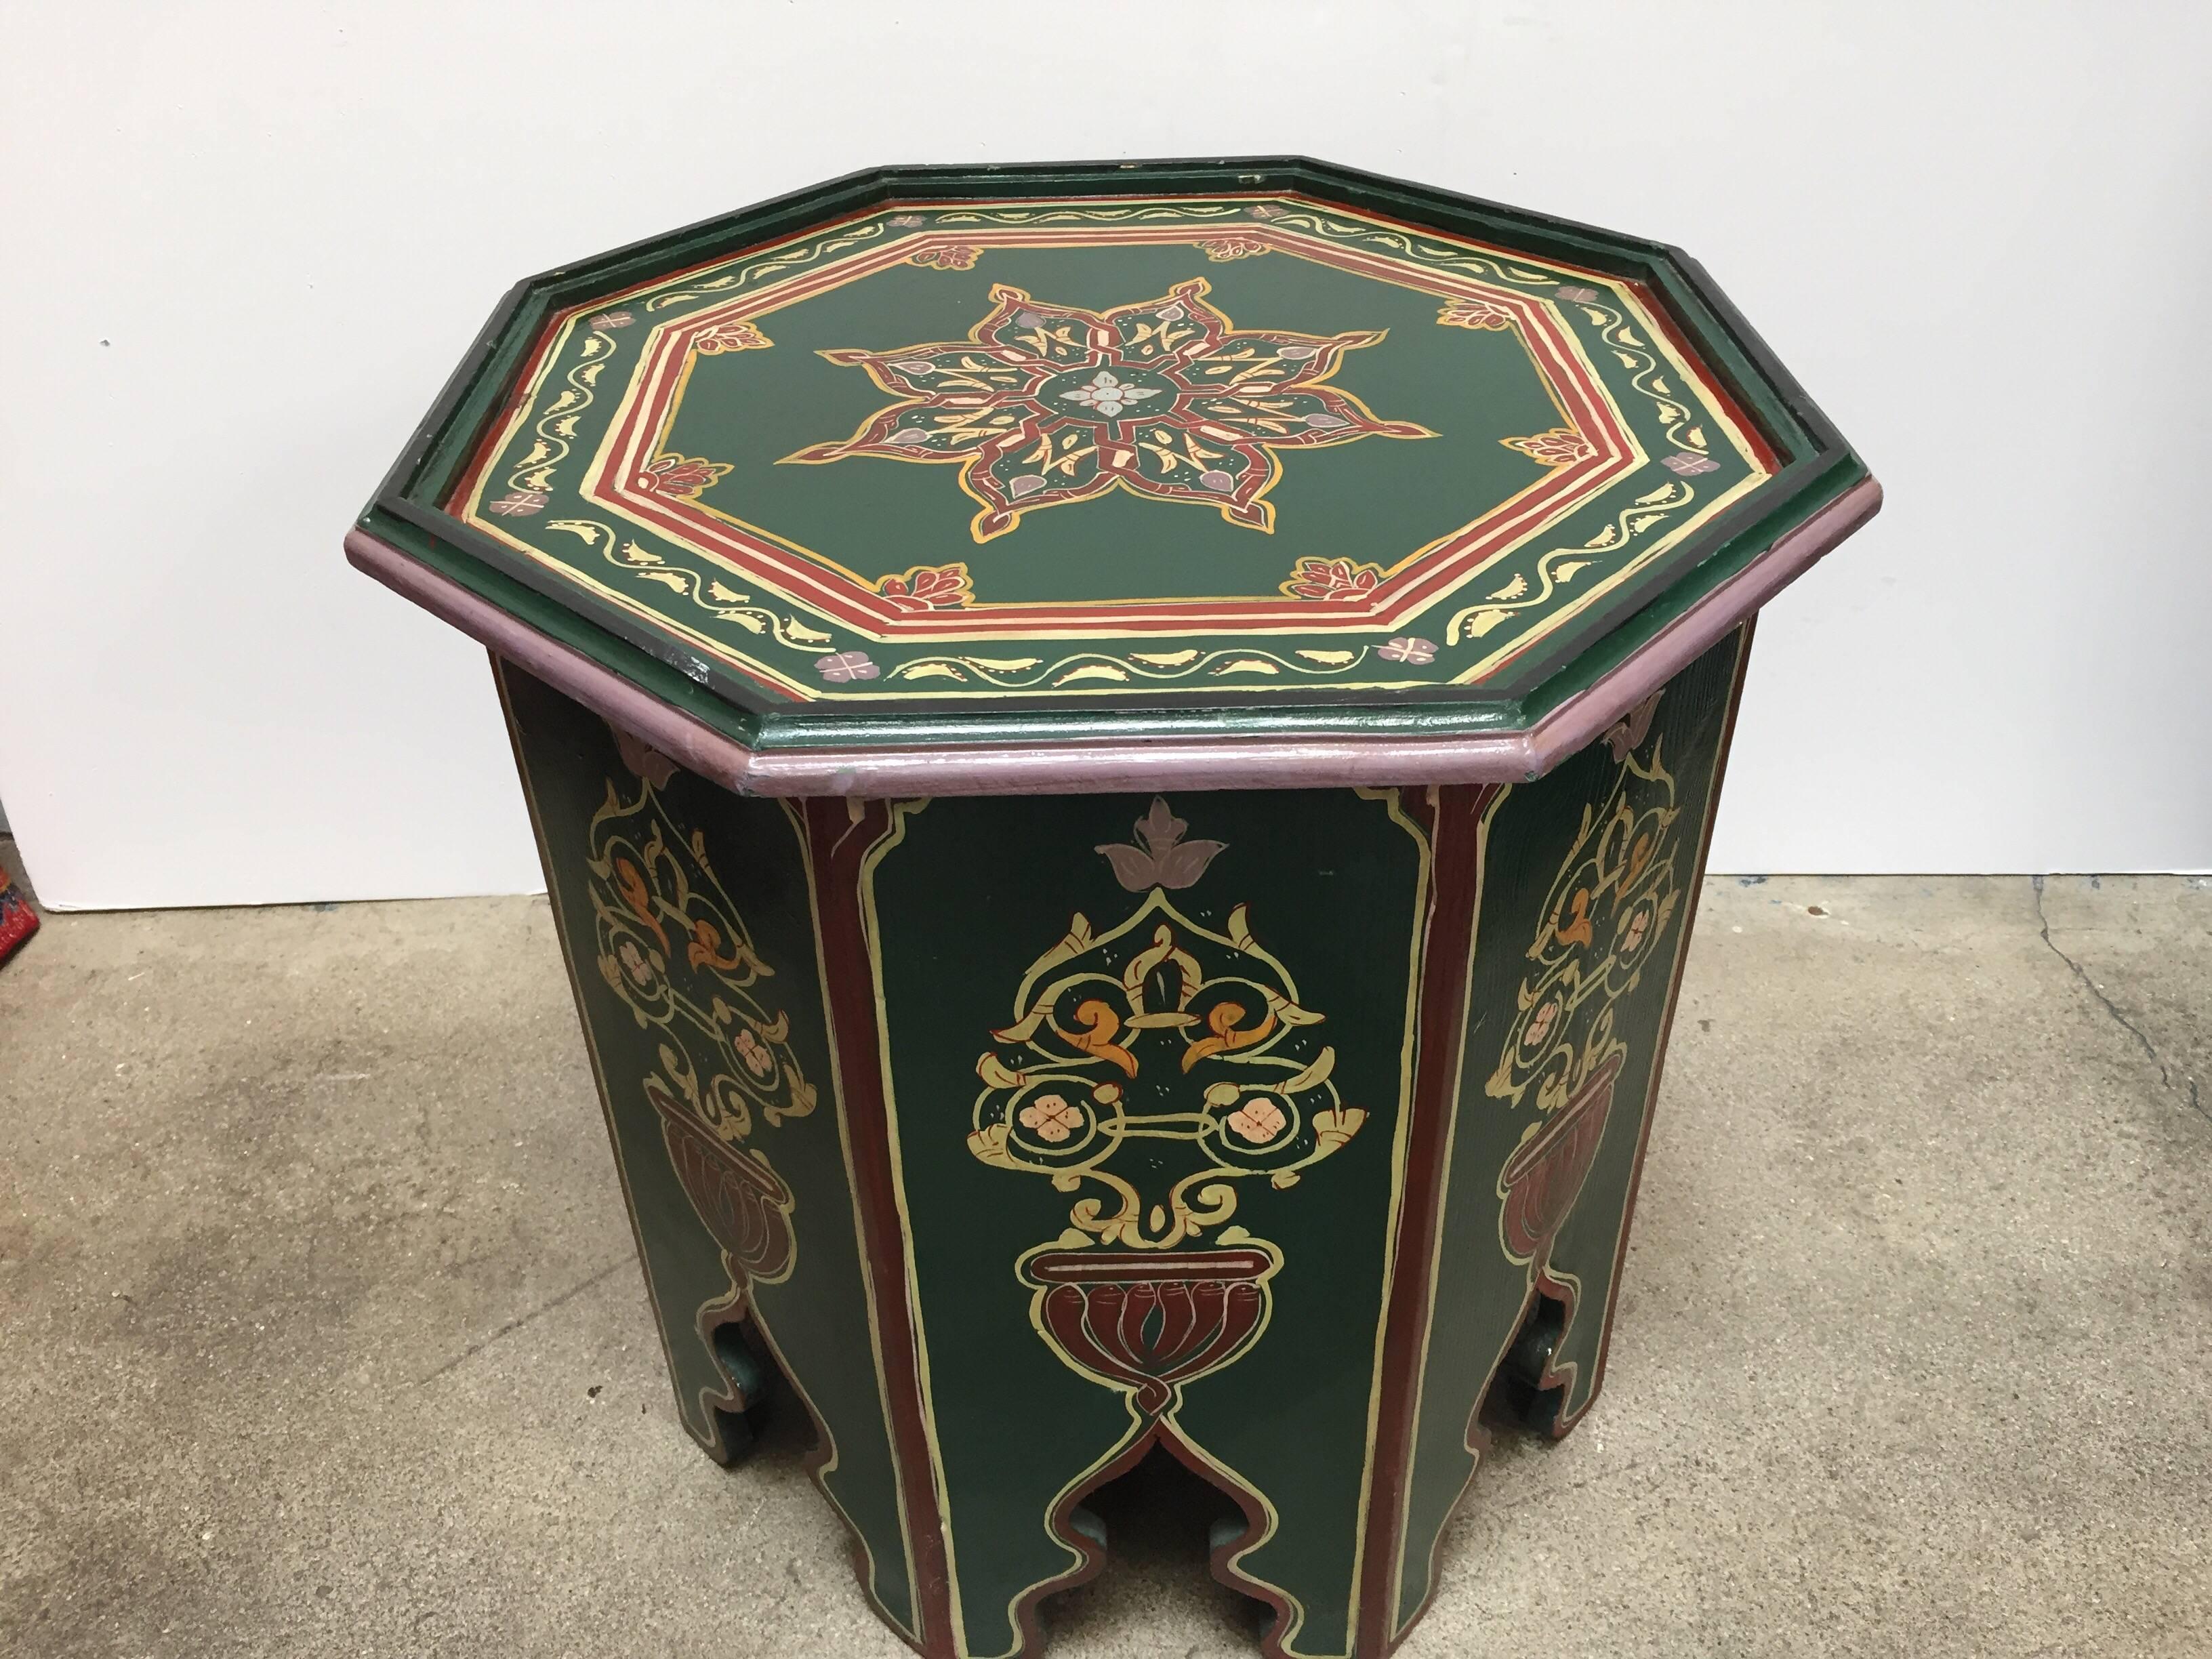 Pair of Moroccan colorful hand-painted dark green side table with Moorish designs cut out work on sides.
Dark green background with multicolored floral top and geometric designs.
Very fine wood artwork on an octagonal shape with Moorish arches on